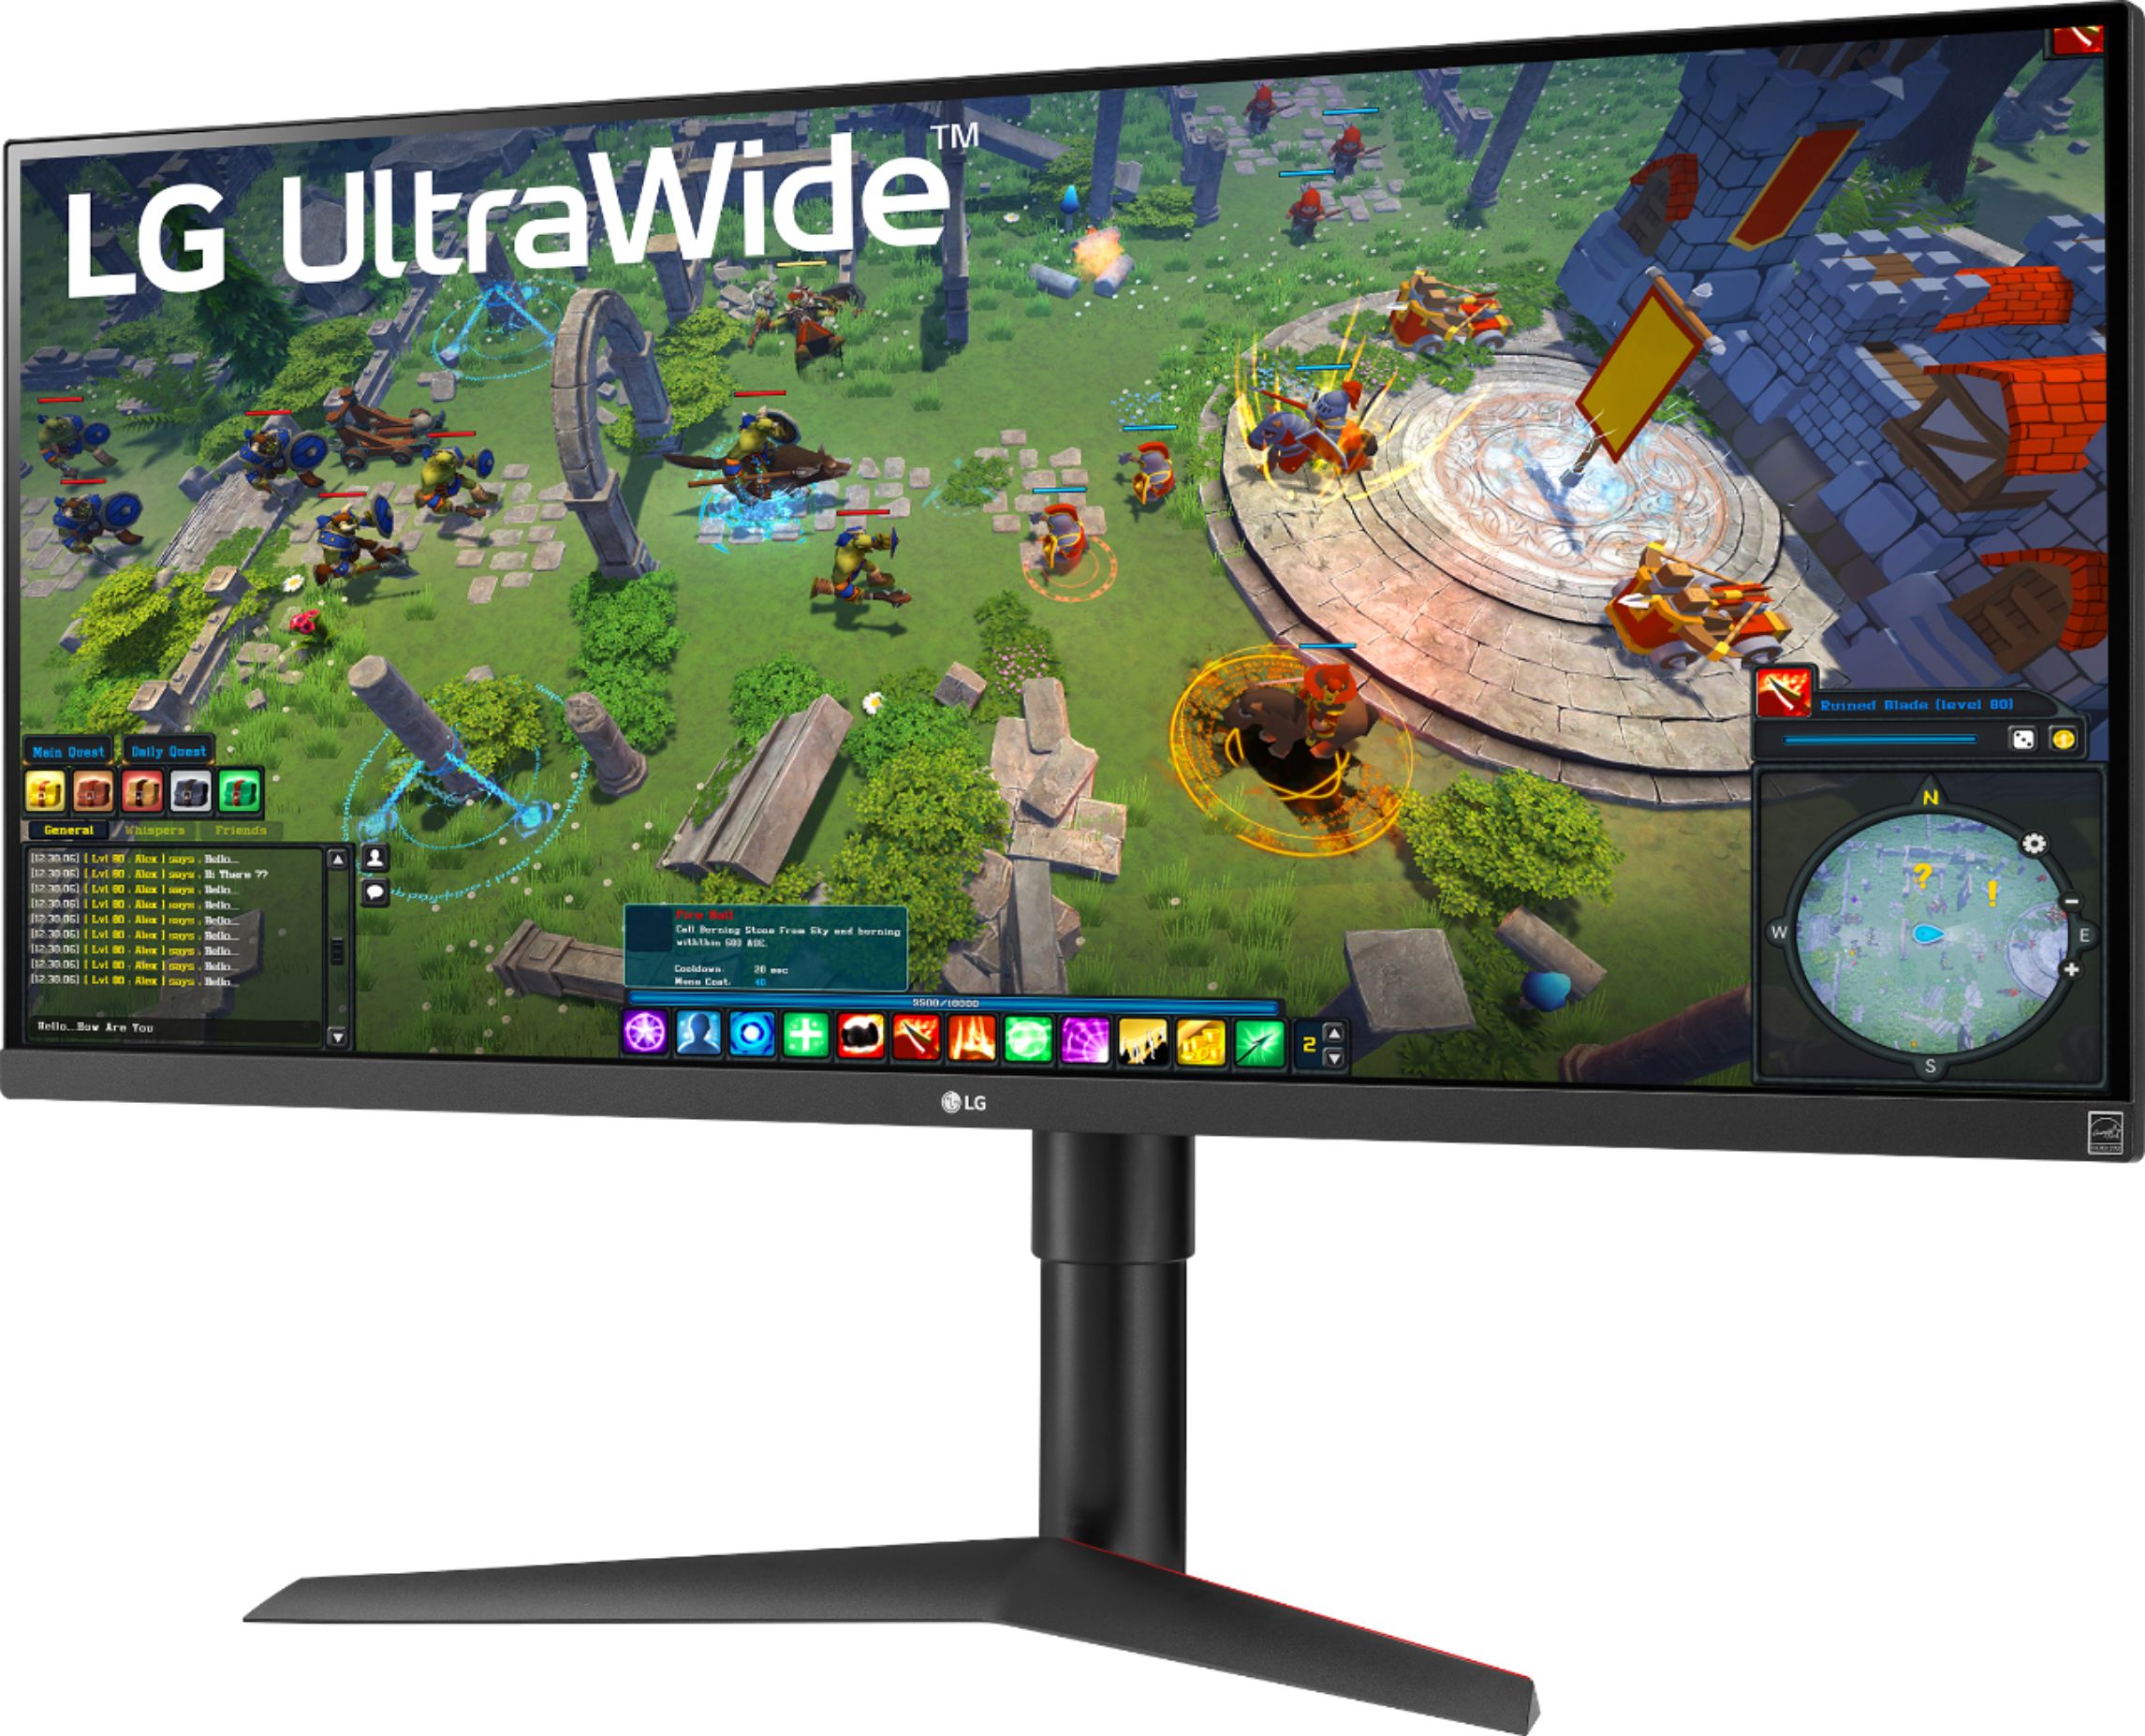 Left View: LG - Geek Squad Certified Refurbished 34" IPS LED UltraWide FreeSync Monitor with HDR - Black